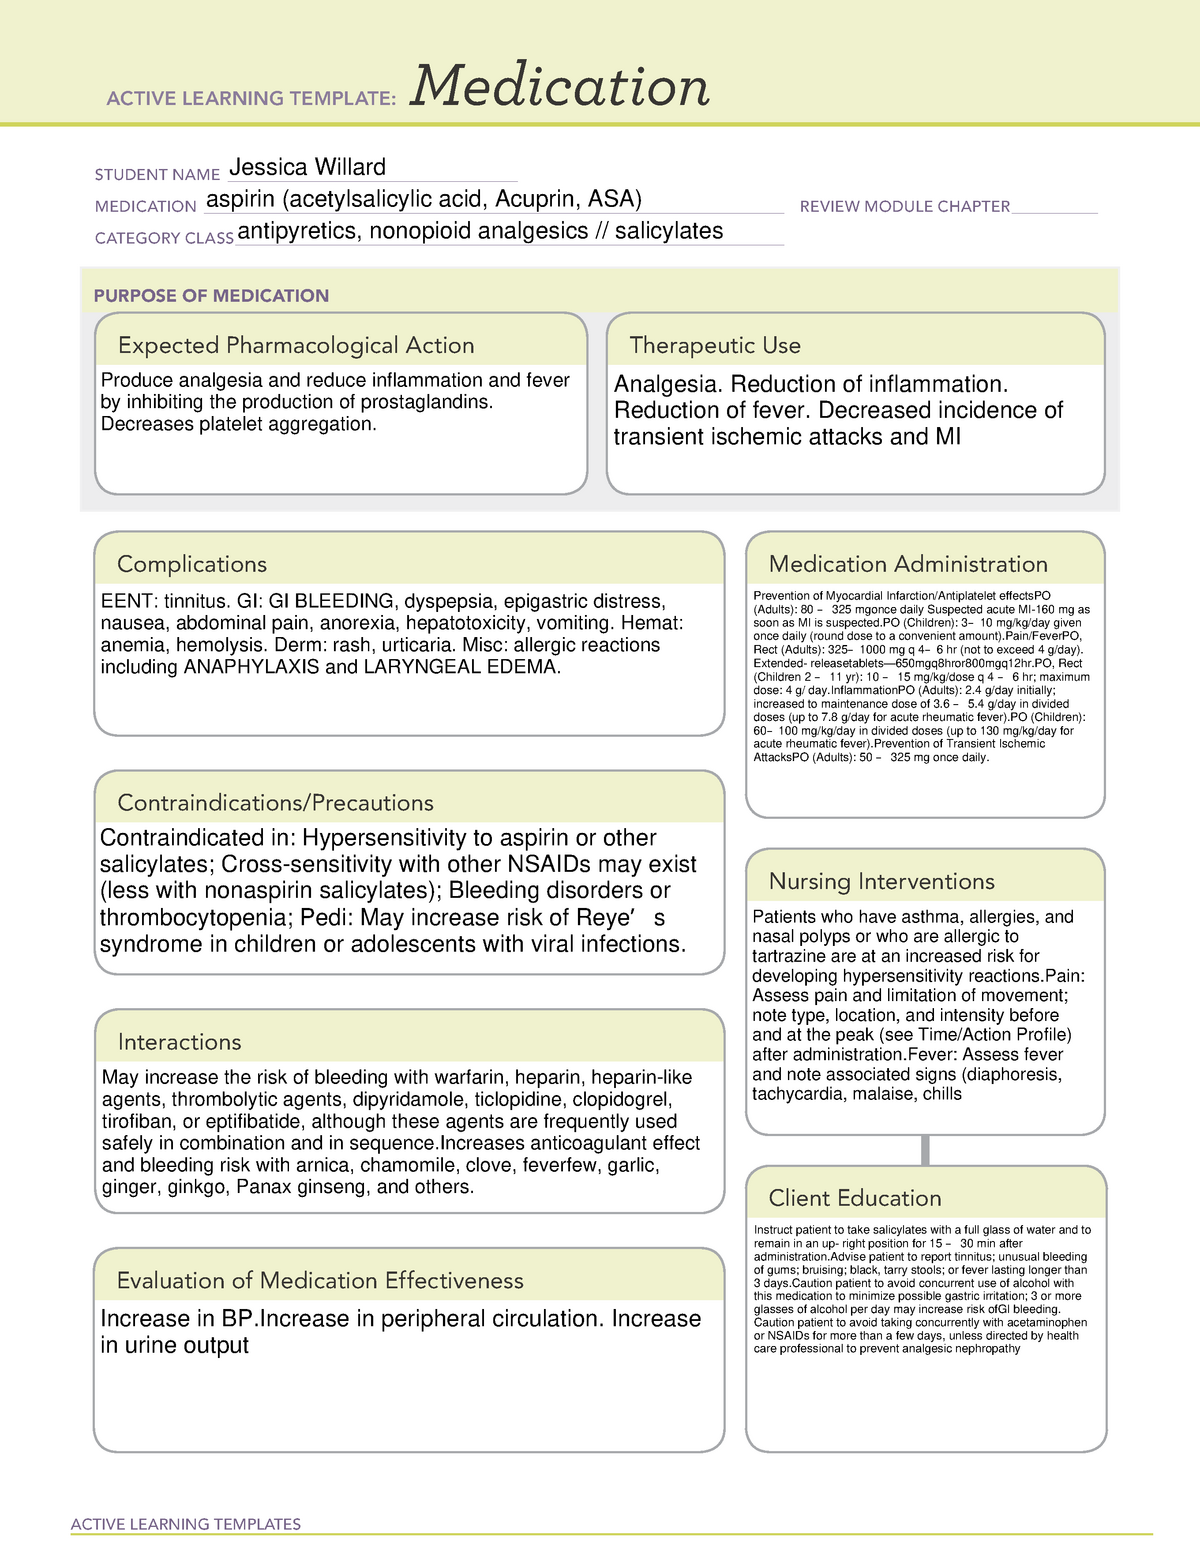 ati learning templete Aspirin ACTIVE LEARNING TEMPLATES Medication